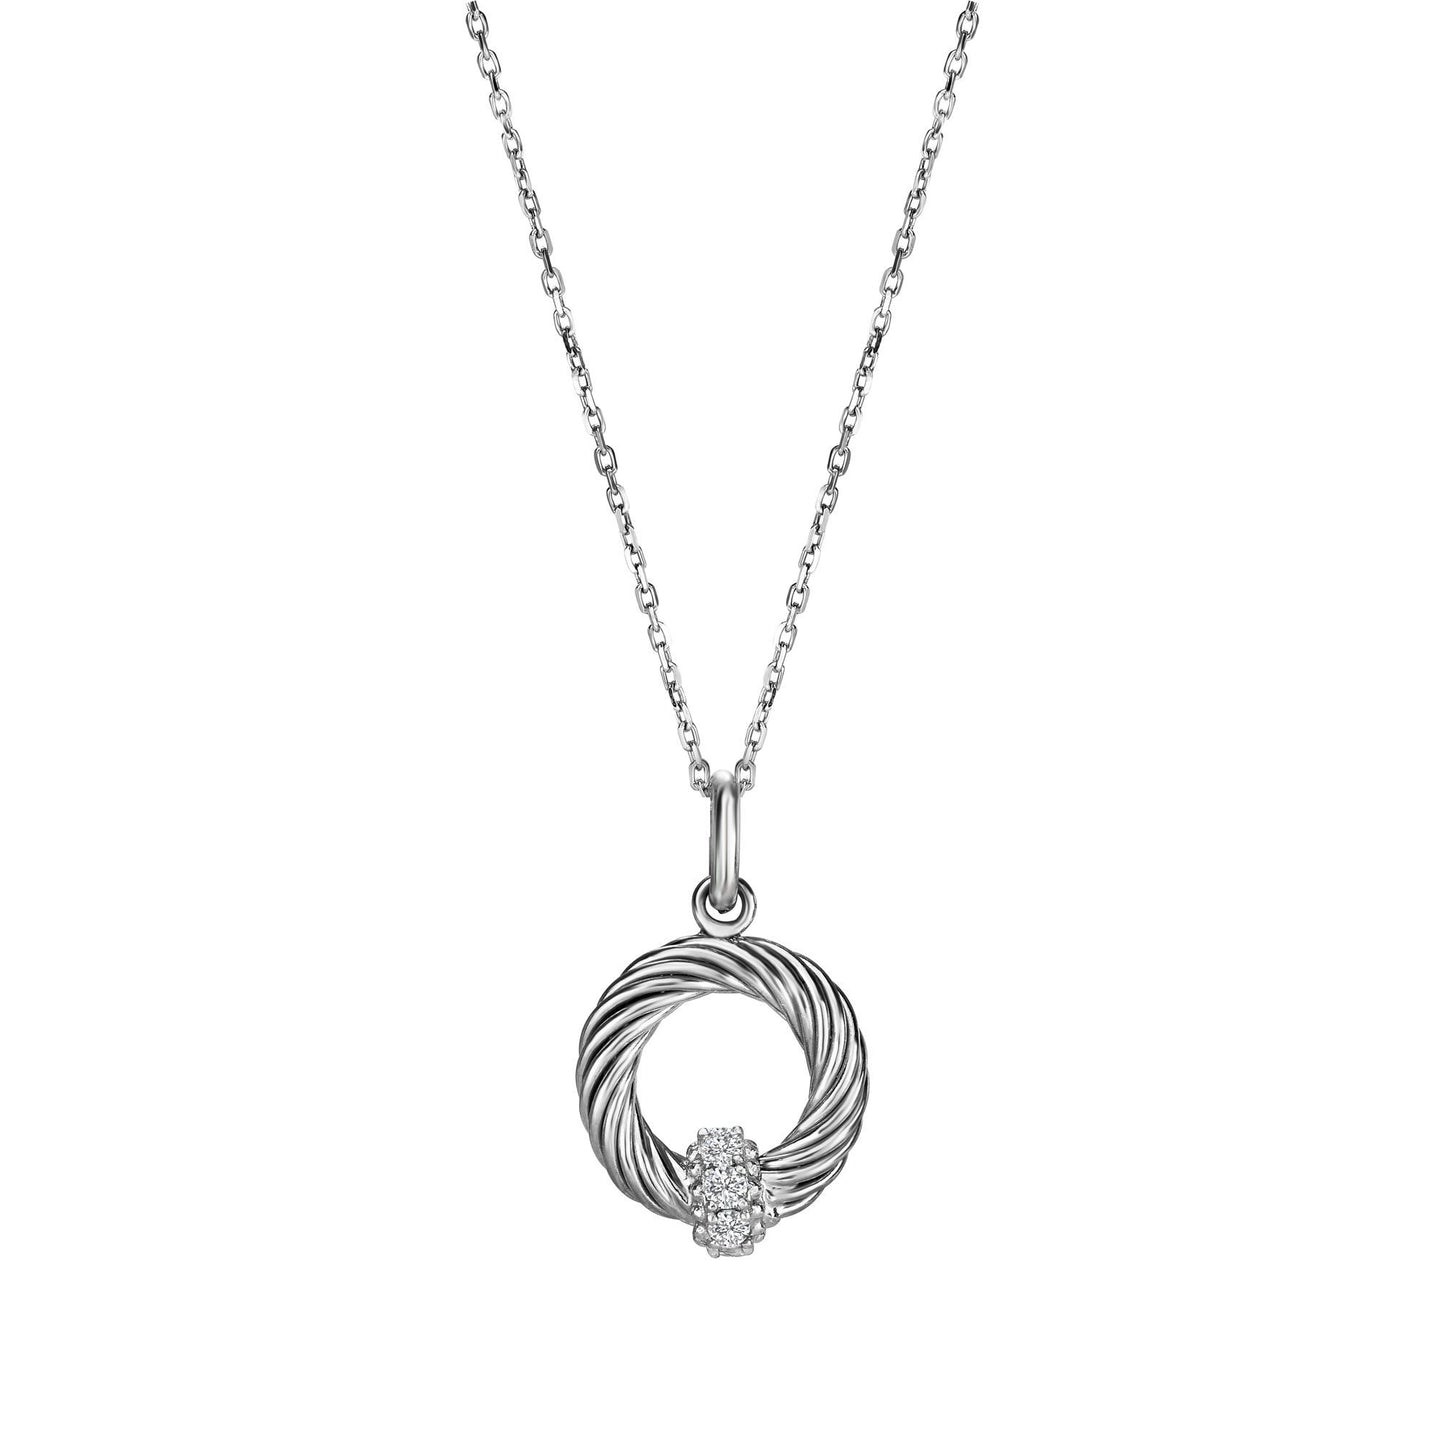 Round Pendant with White Diamonds on Sterling Silver with Diamond Cut Classic Cable Chain with Lobster Clasp